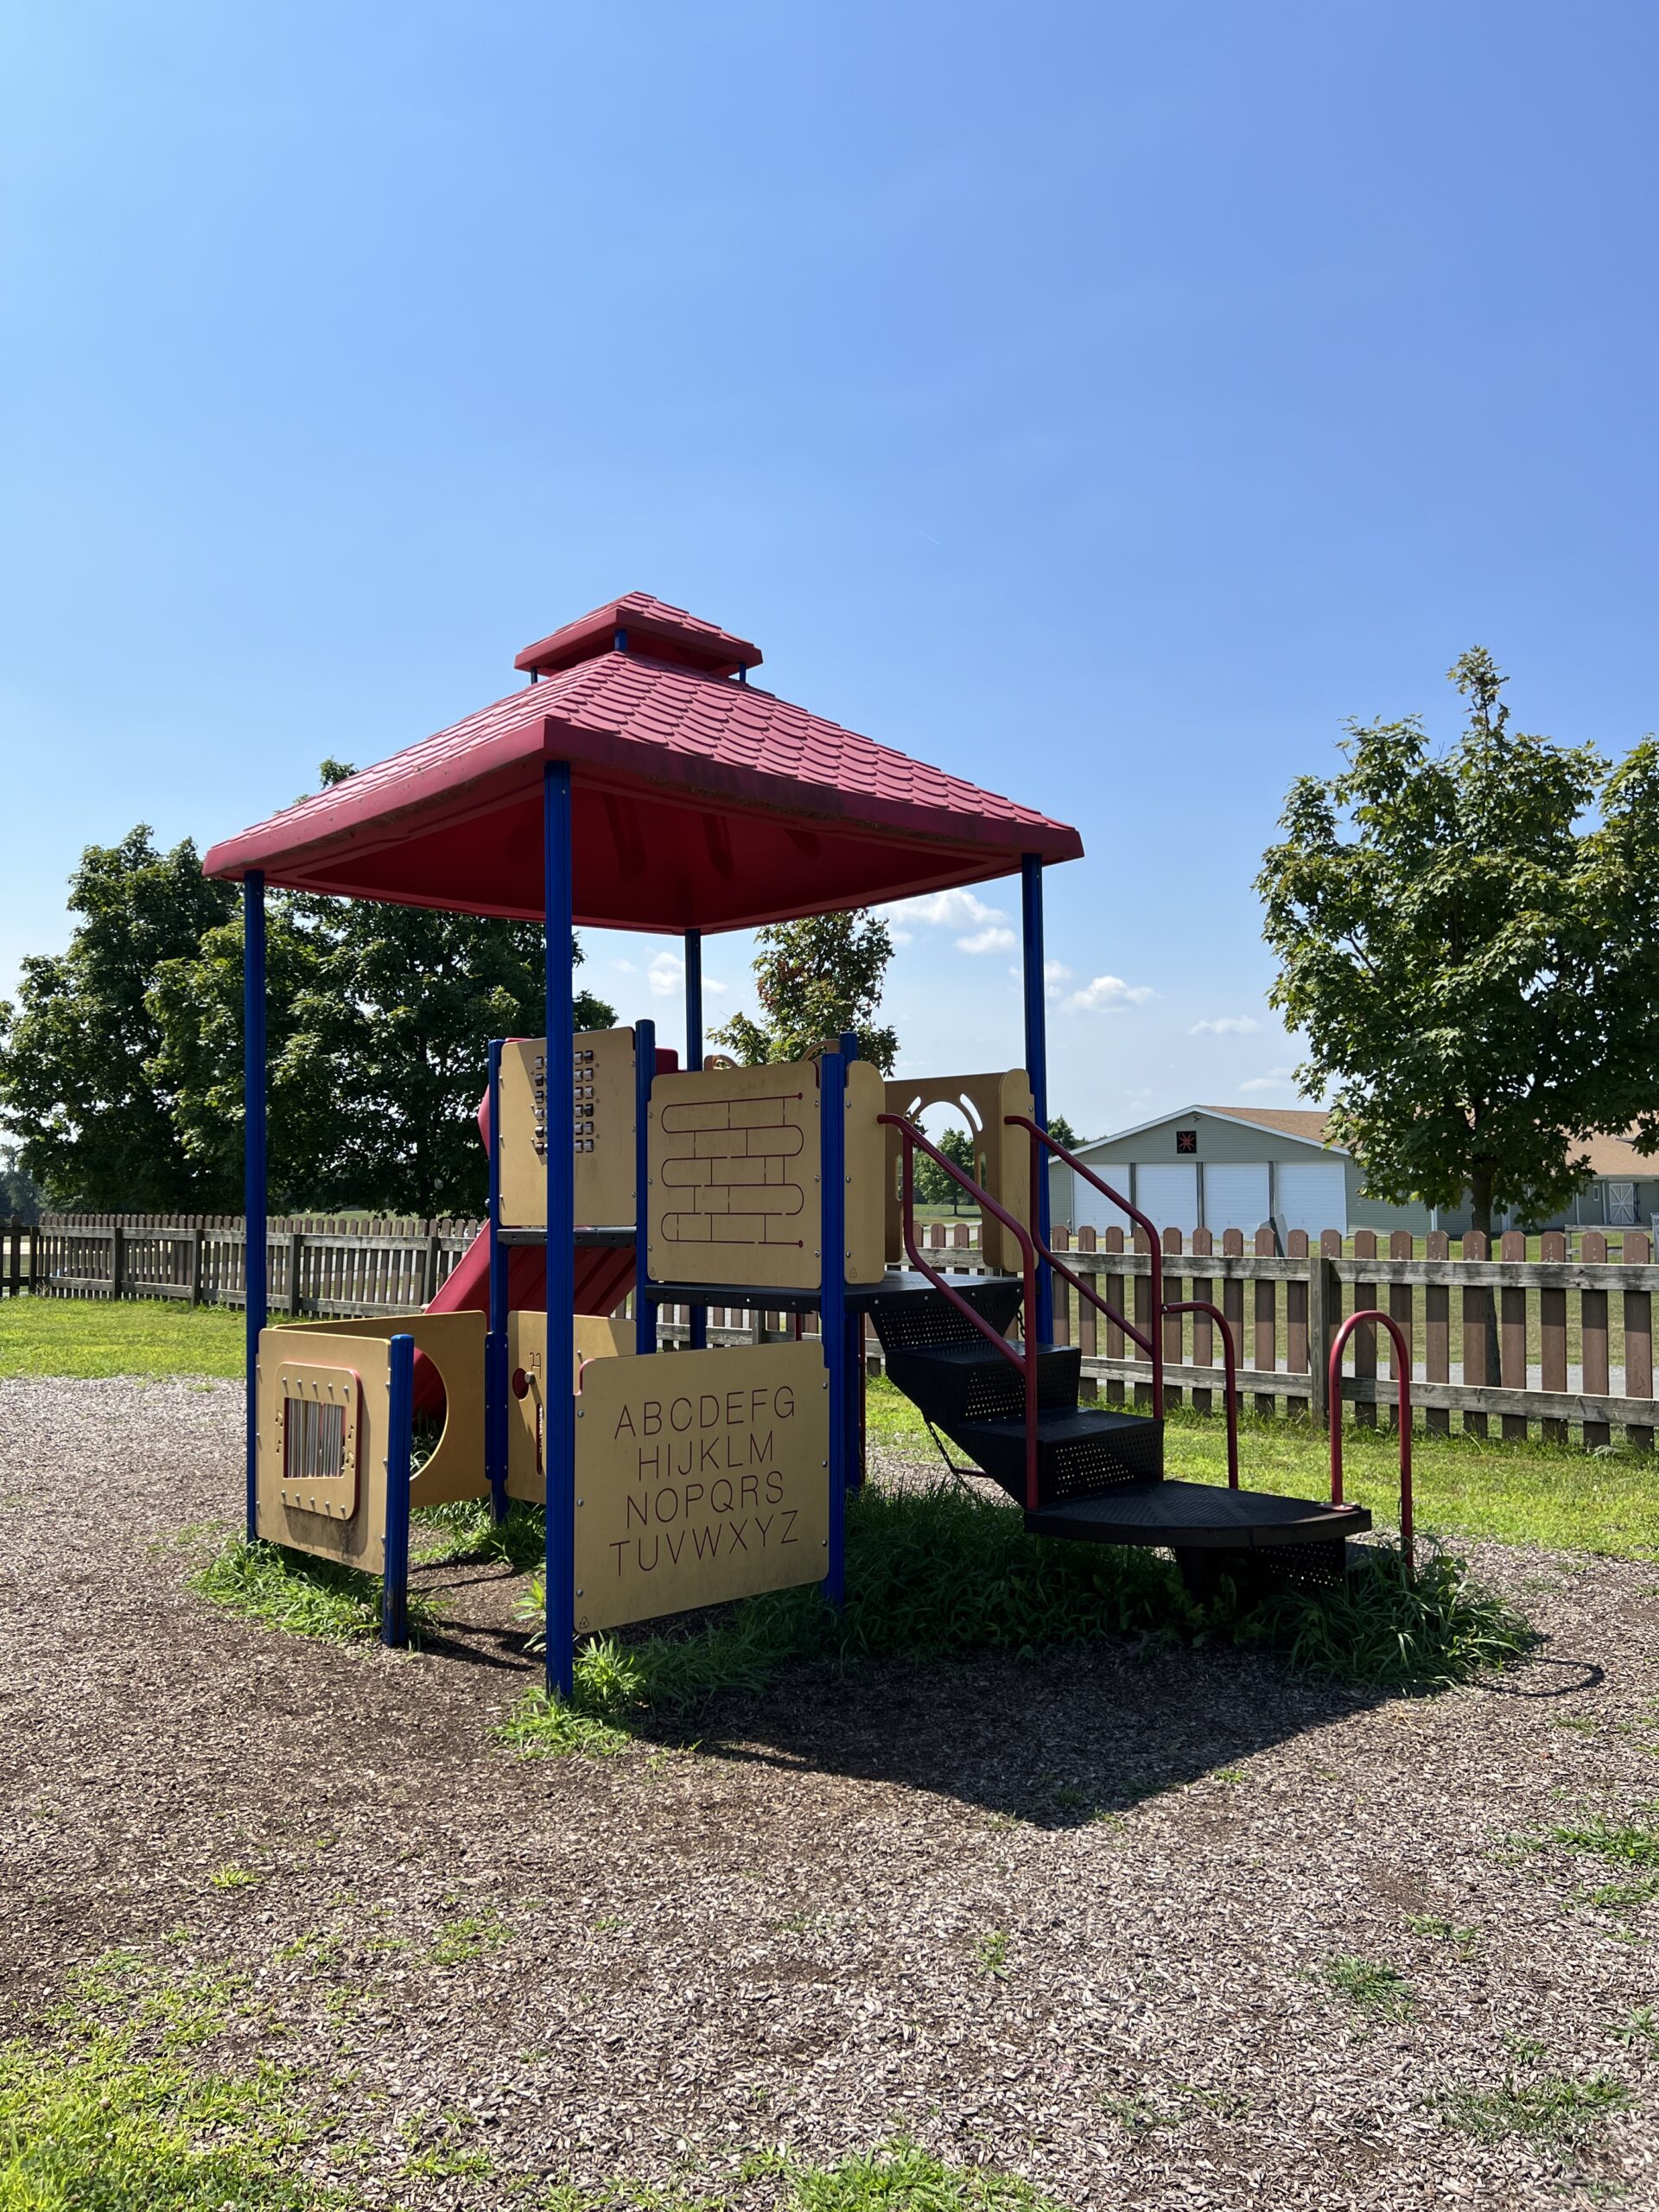 Alexandria Township Park Playground in Milford NJ - Tall image - red roof playground ABC side